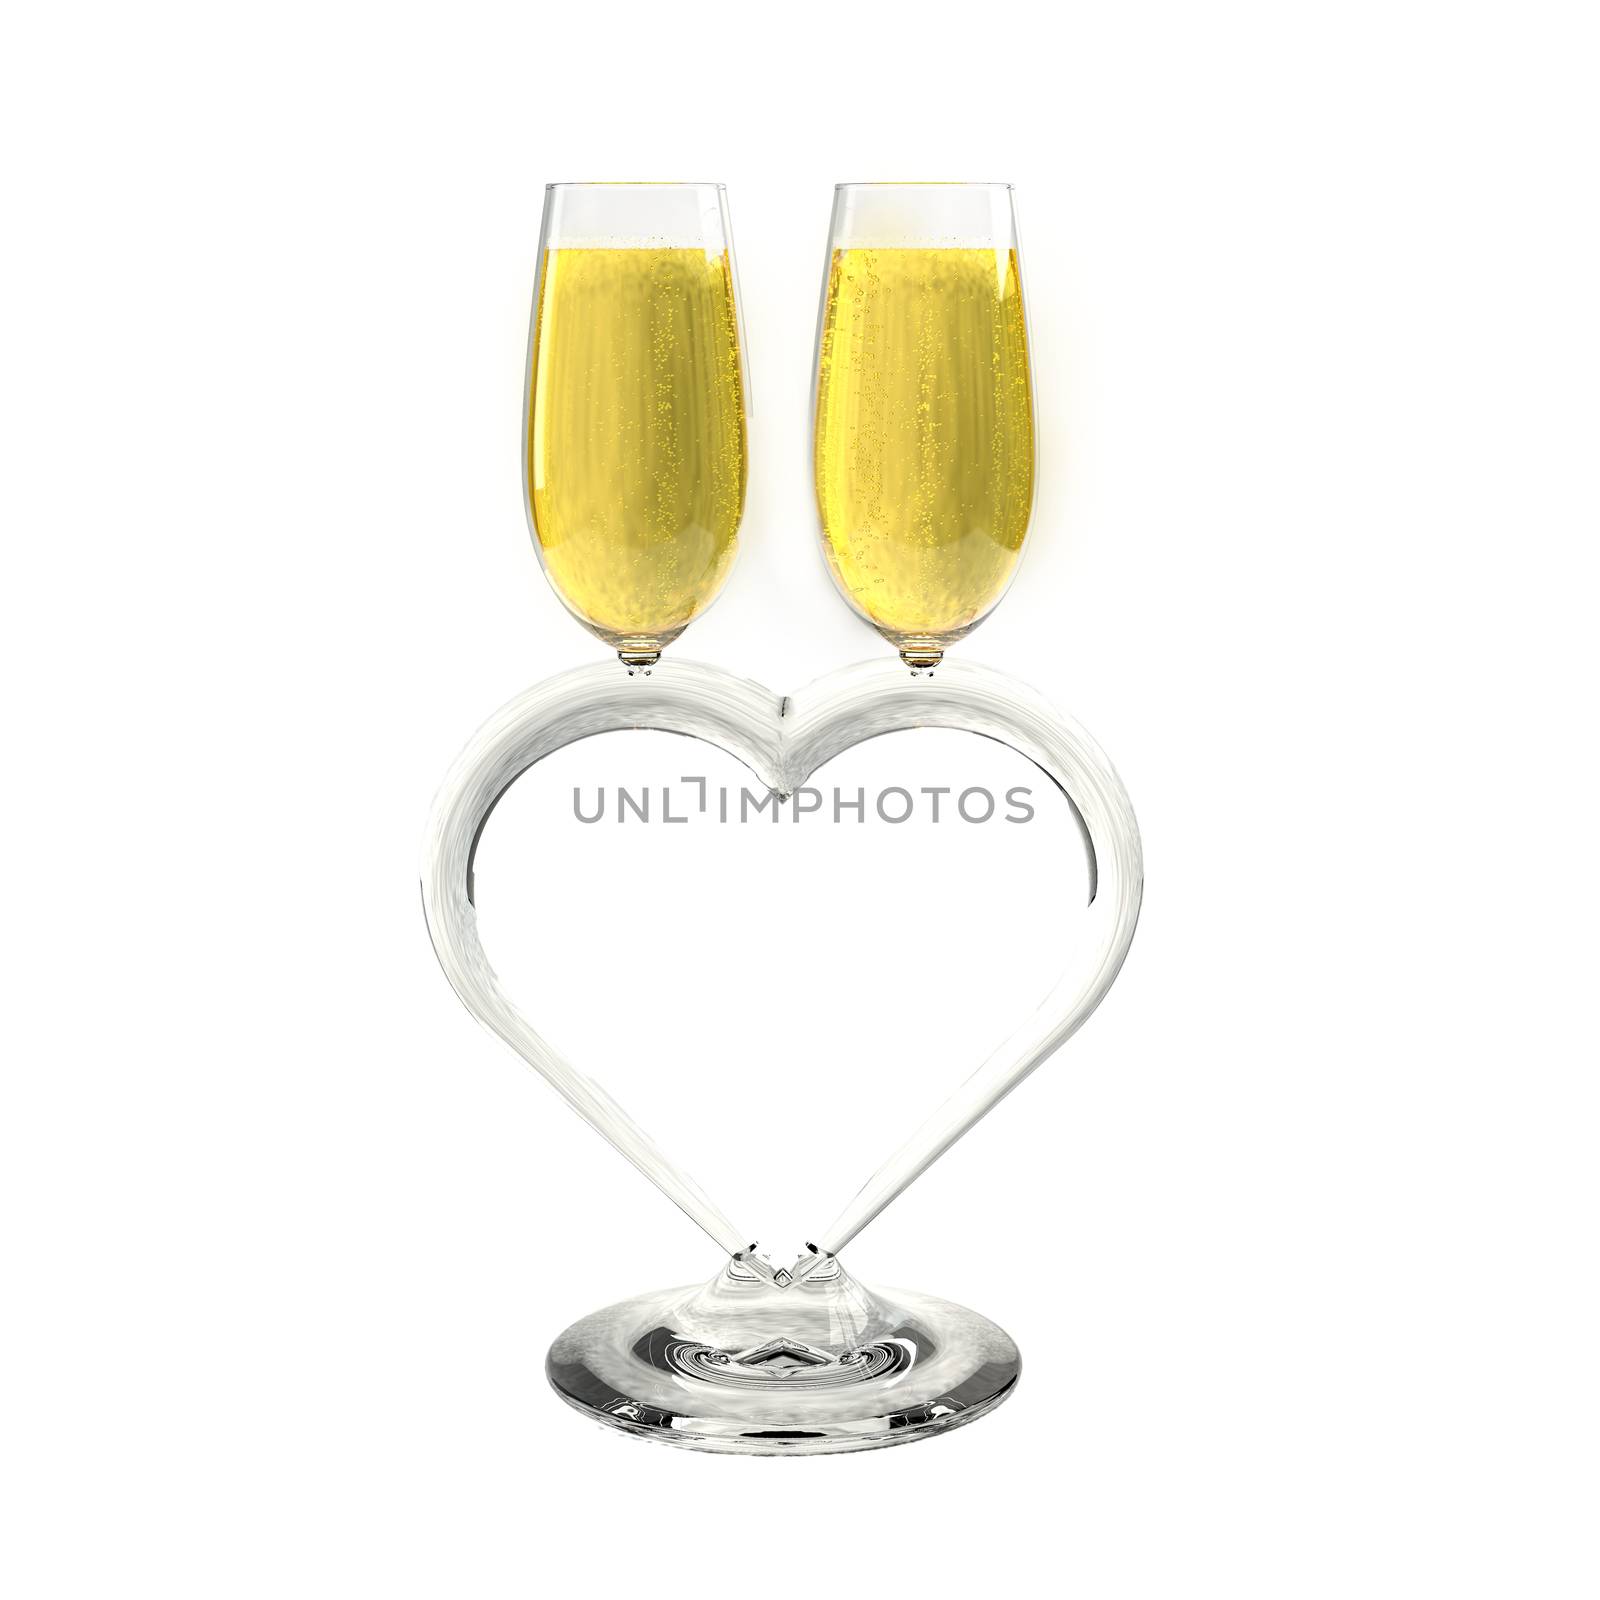 Two champagne glasses heart shaped on a white background which symbolizes love.